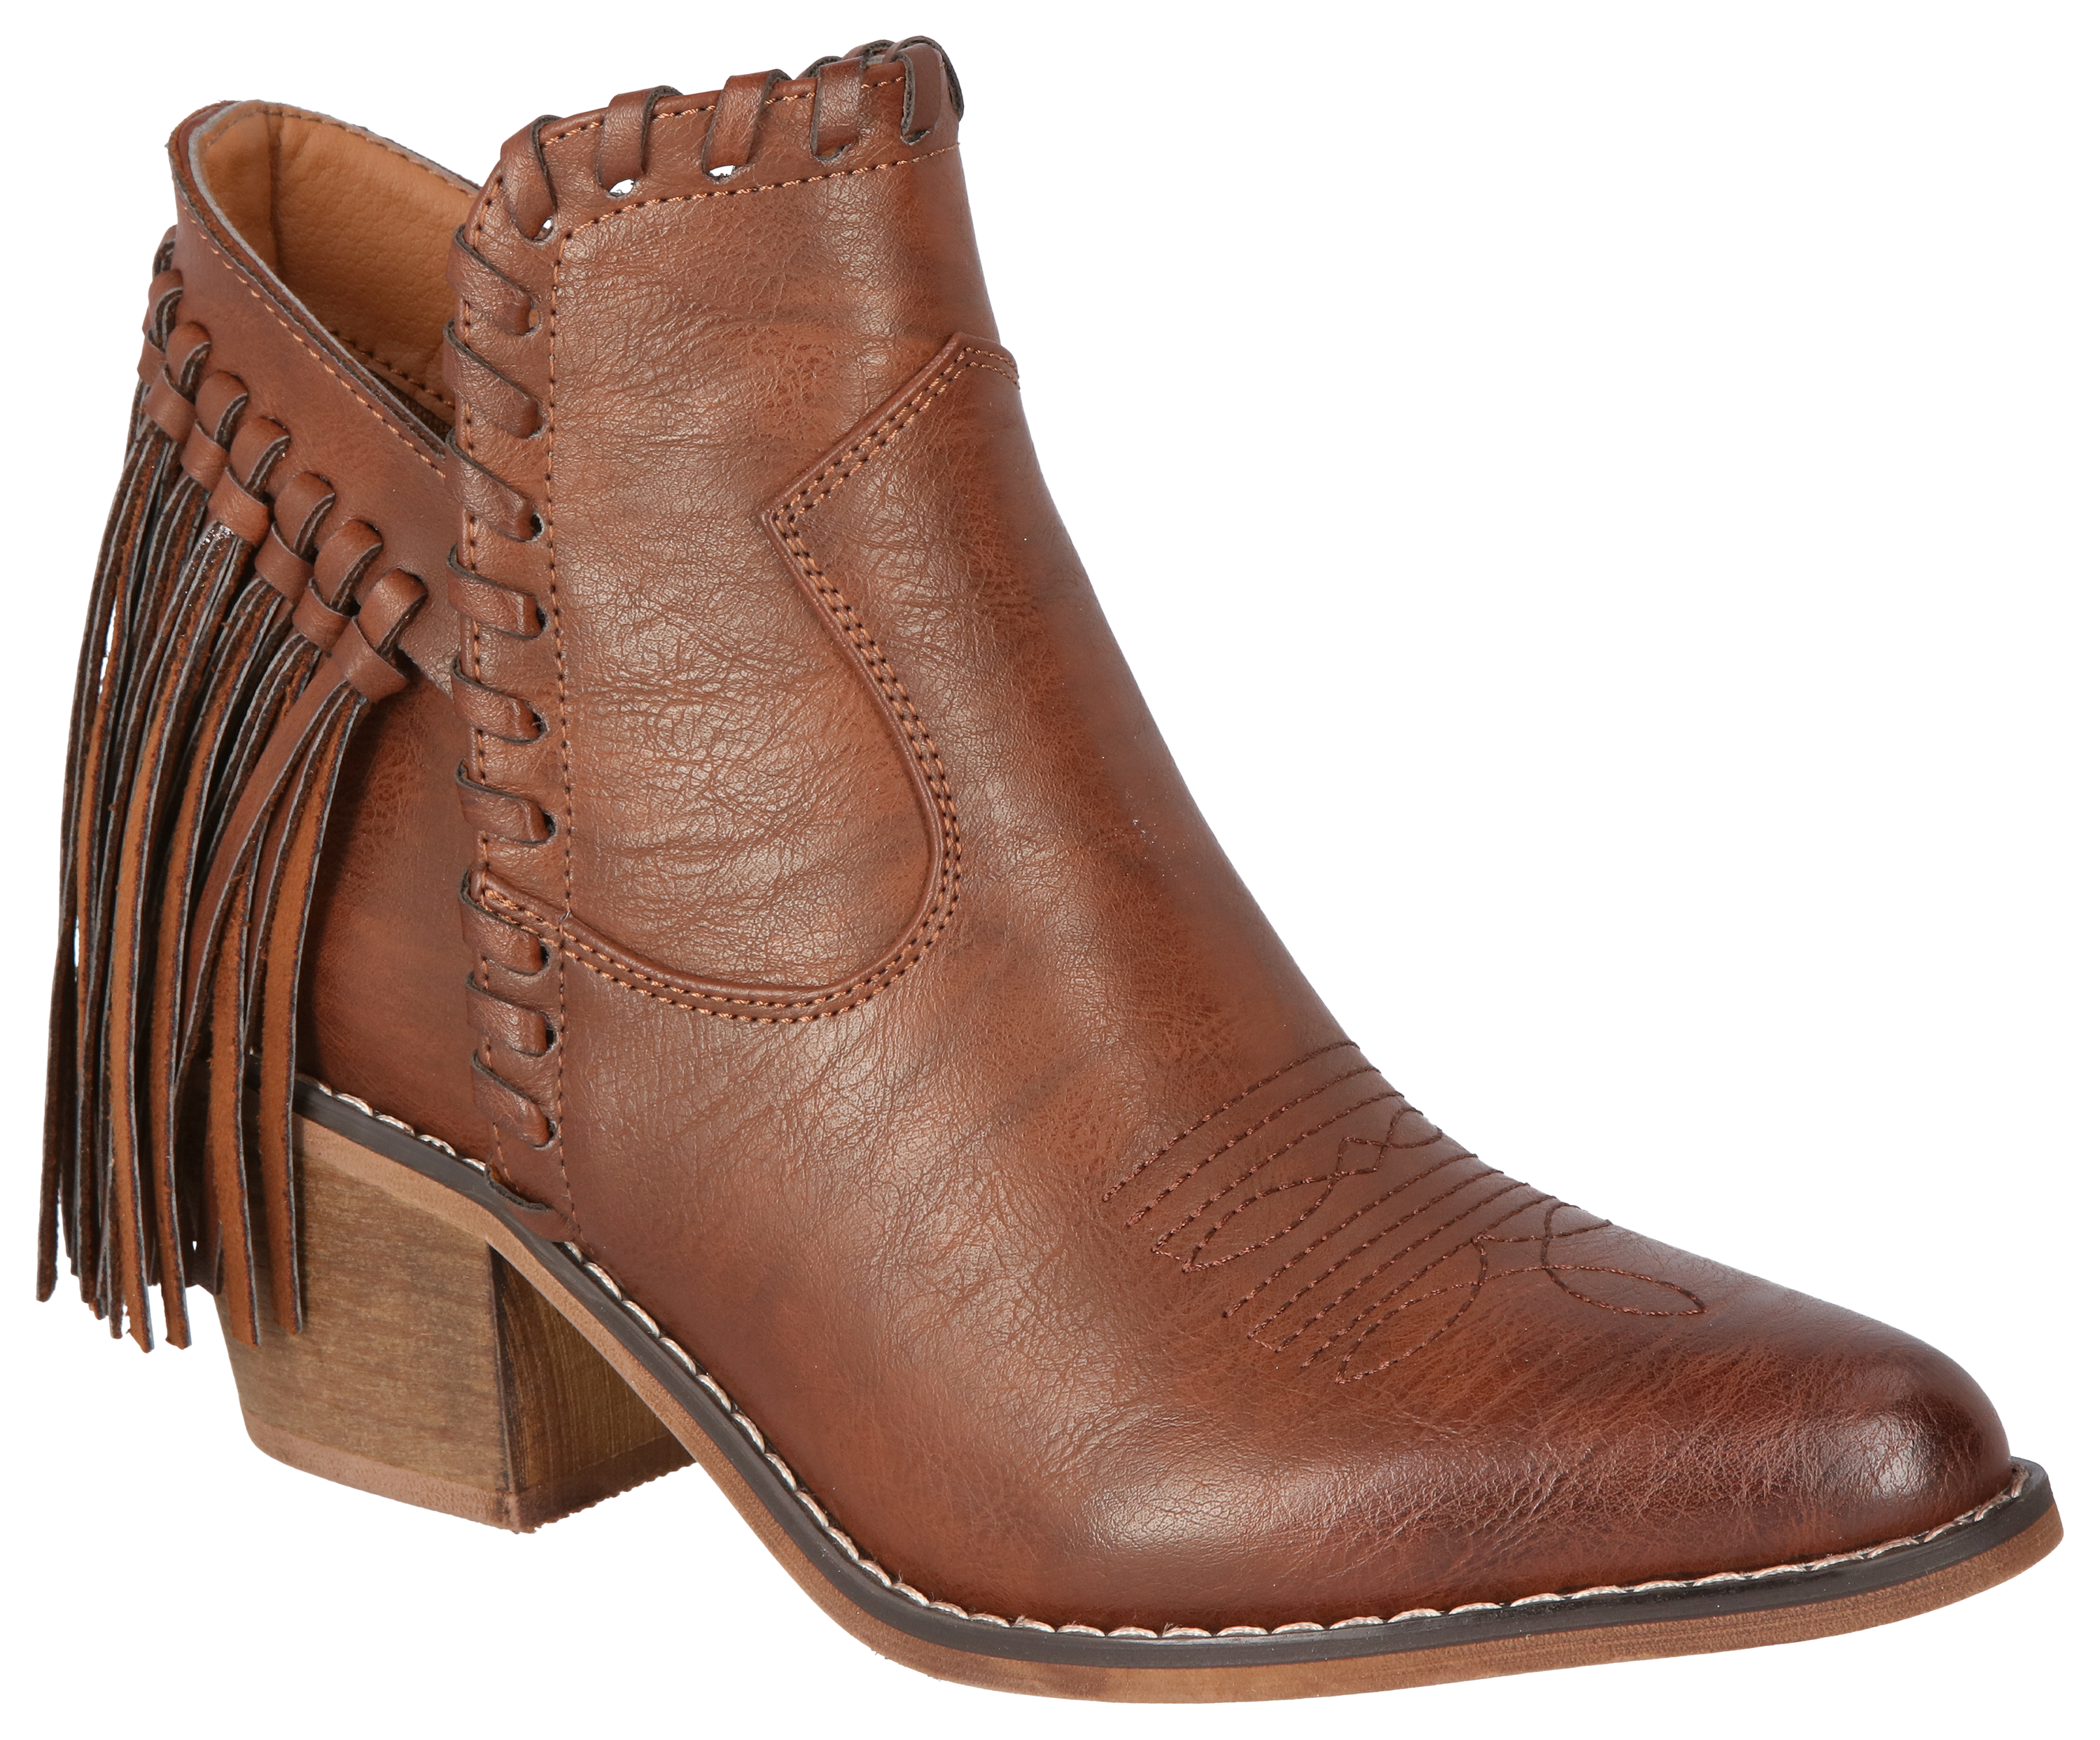 Natural Reflections Keykee Tassel Boots for Ladies - Whiskey - 6M